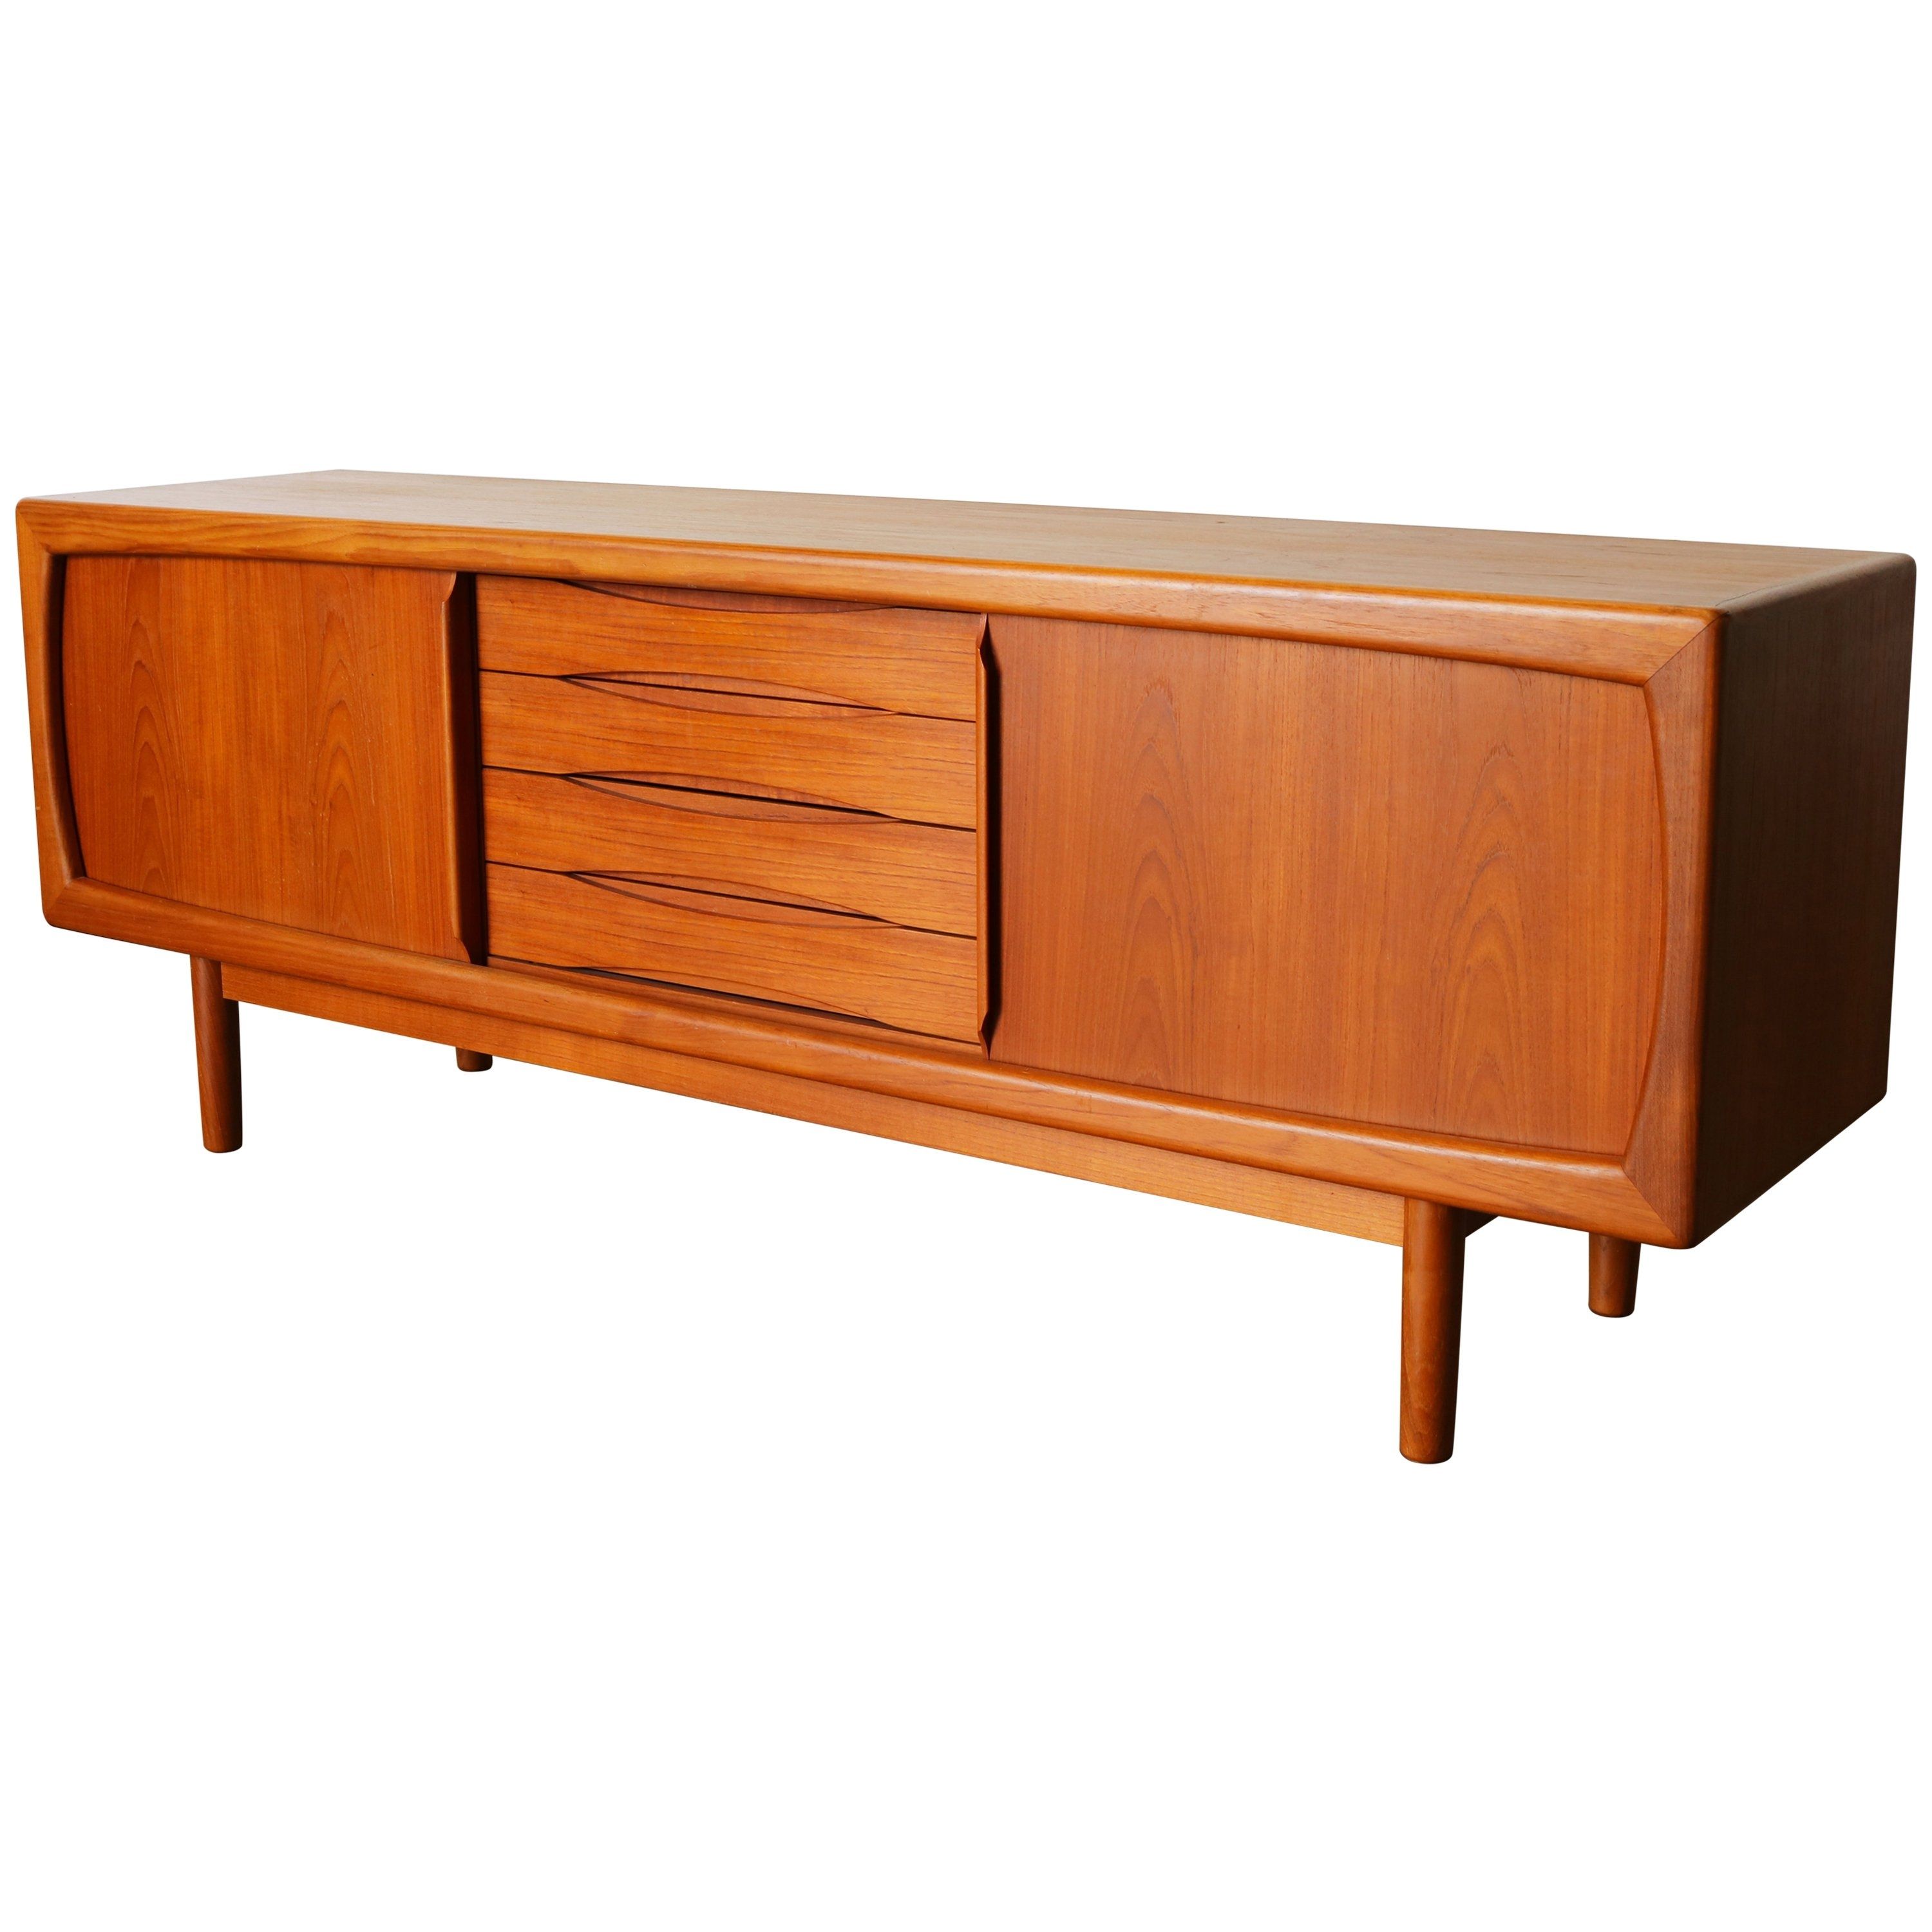 Striking 'intarsia' Sideboard With A Vintage Designaldo Rossi Throughout Rossi Large Sideboards (View 5 of 30)